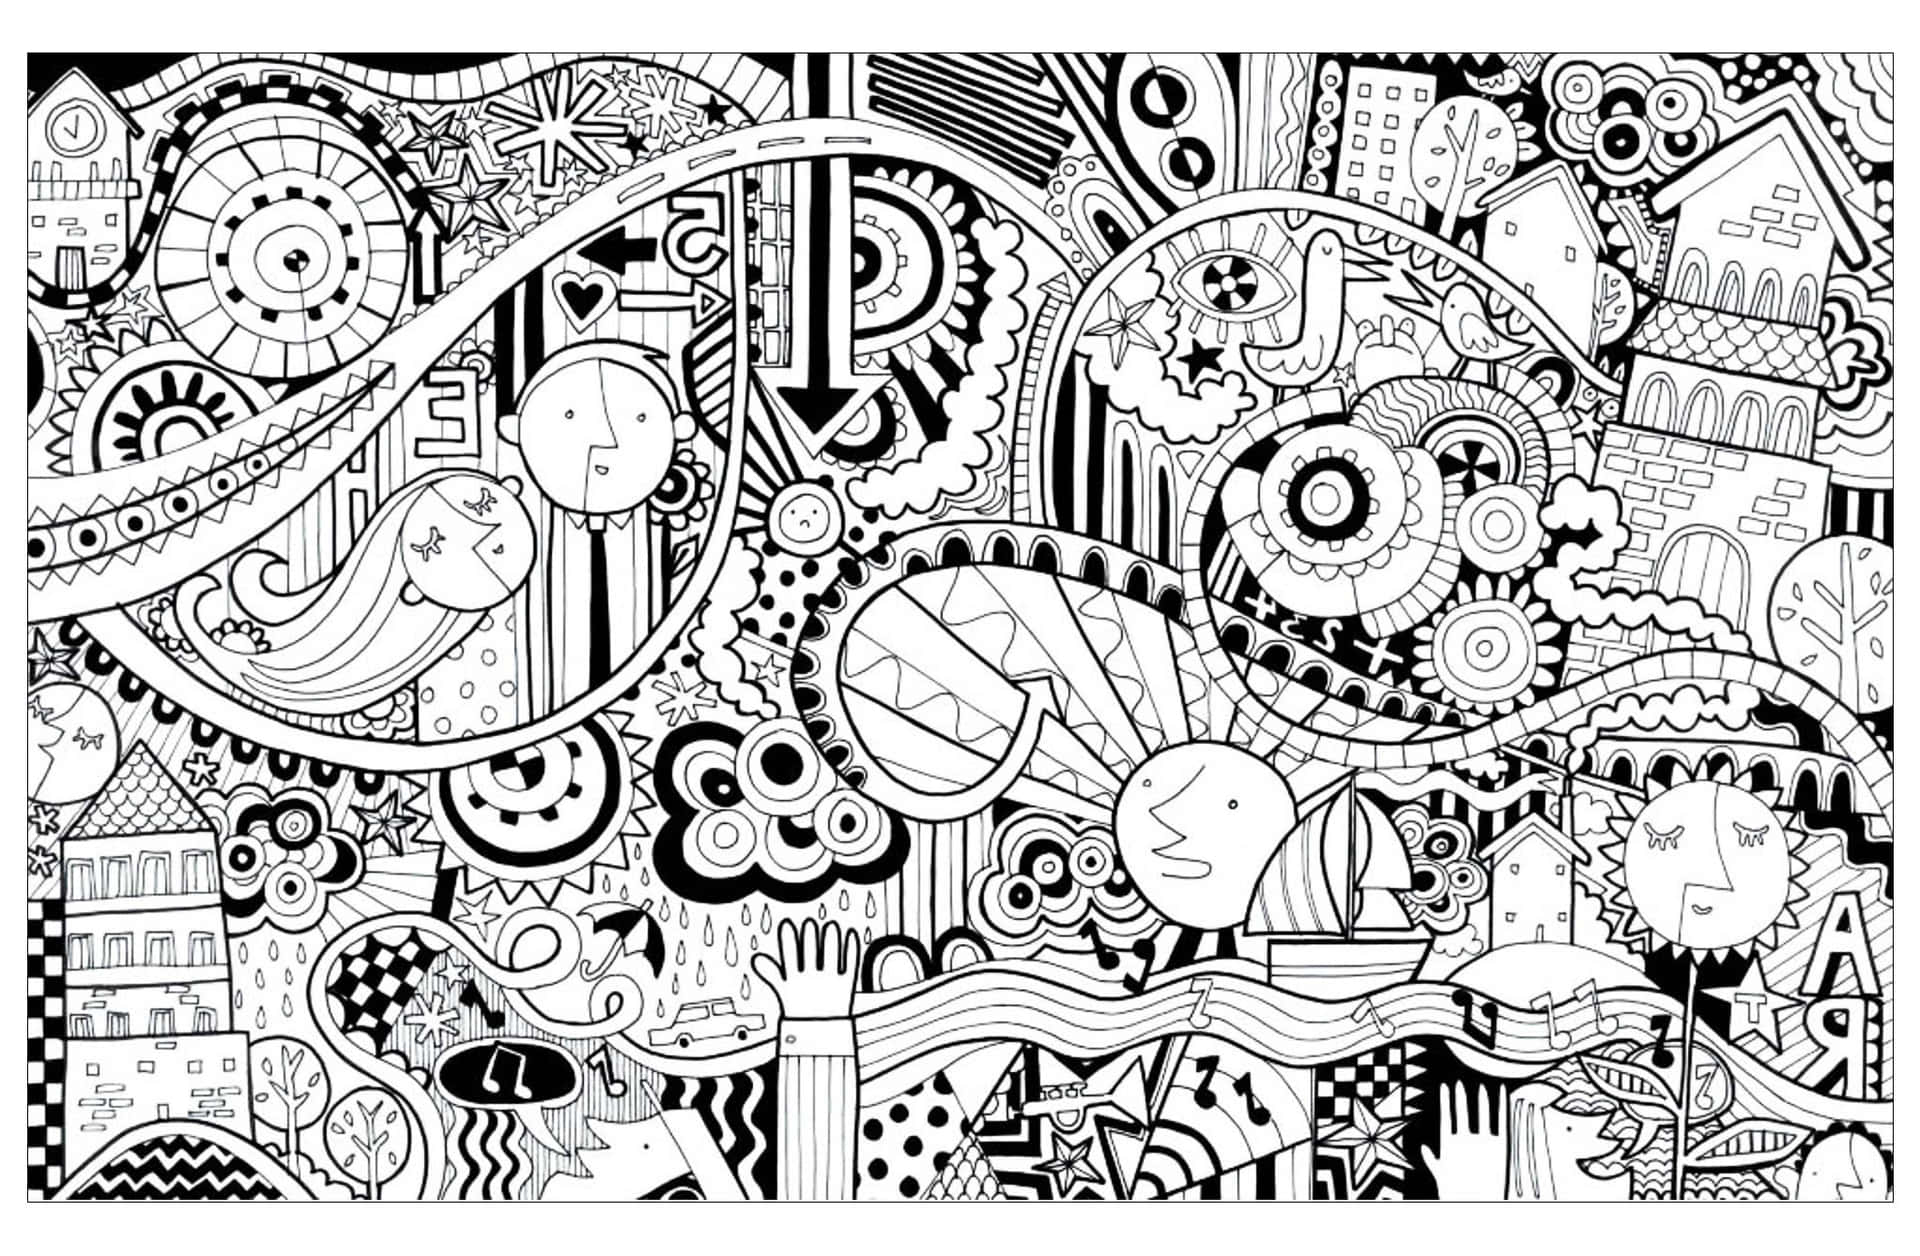 Enjoy Creative Expressions with Doodle